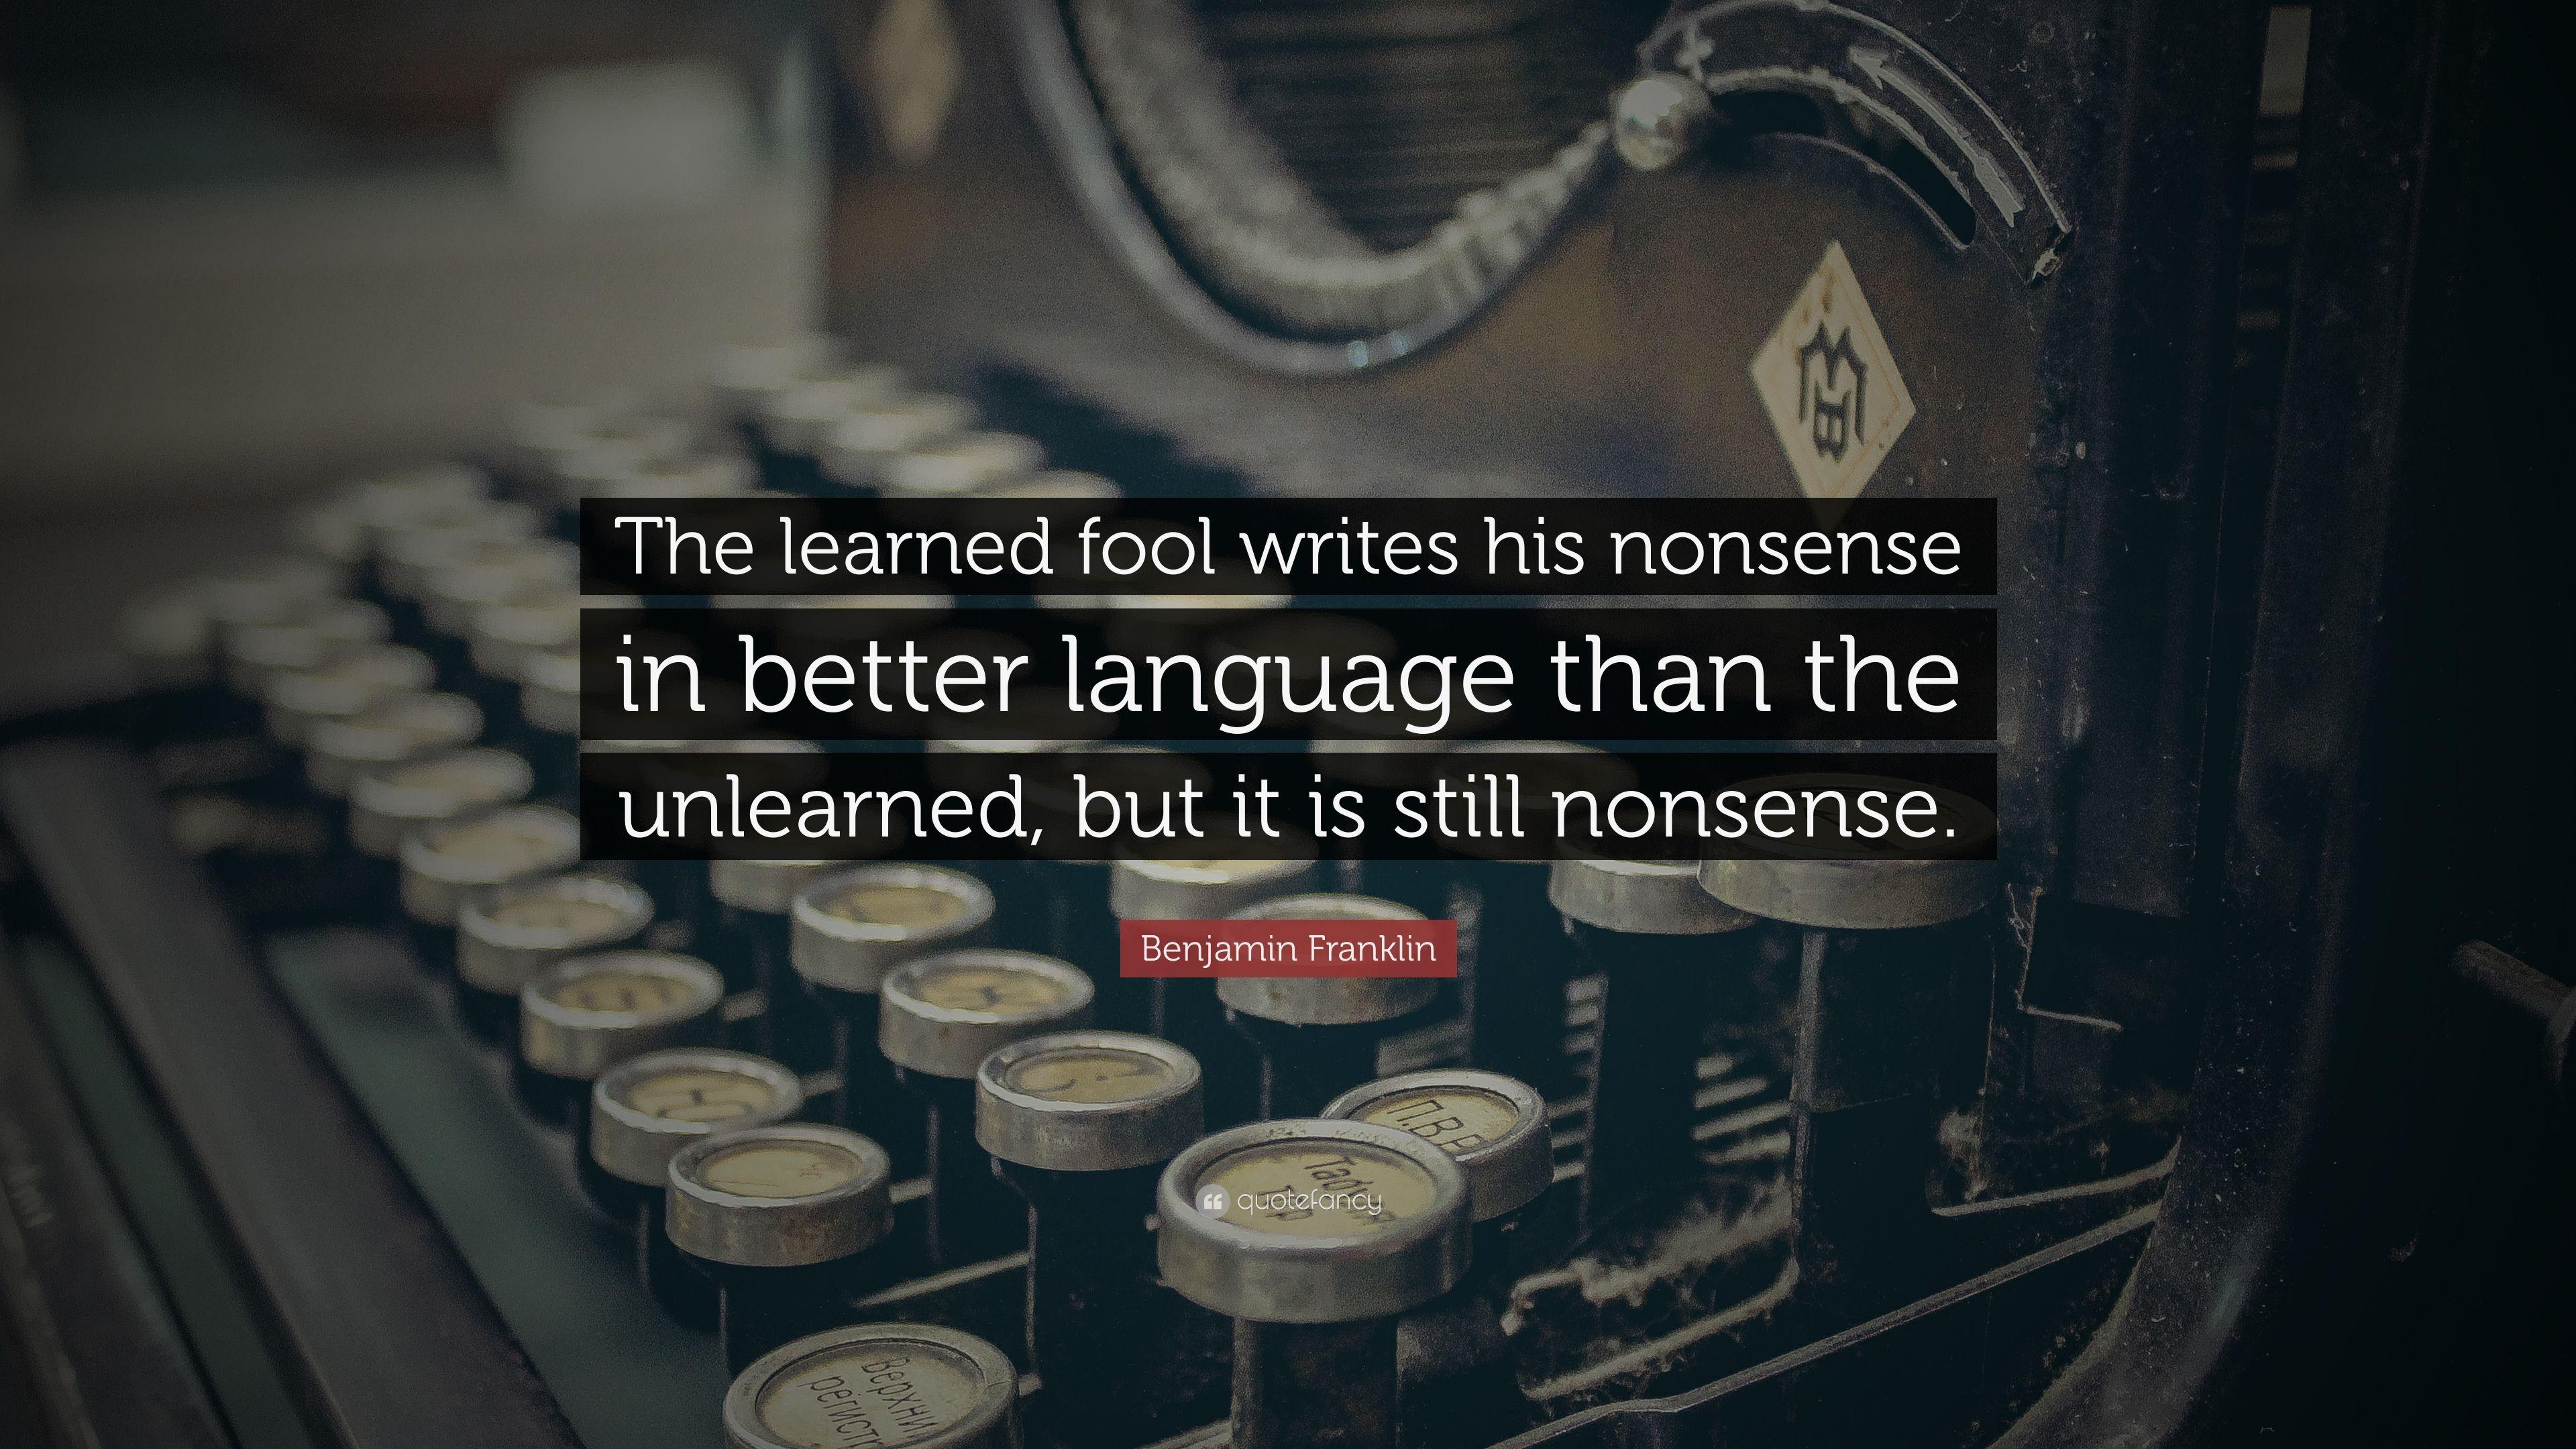 Benjamin Franklin Quote: “The learned fool writes his nonsense